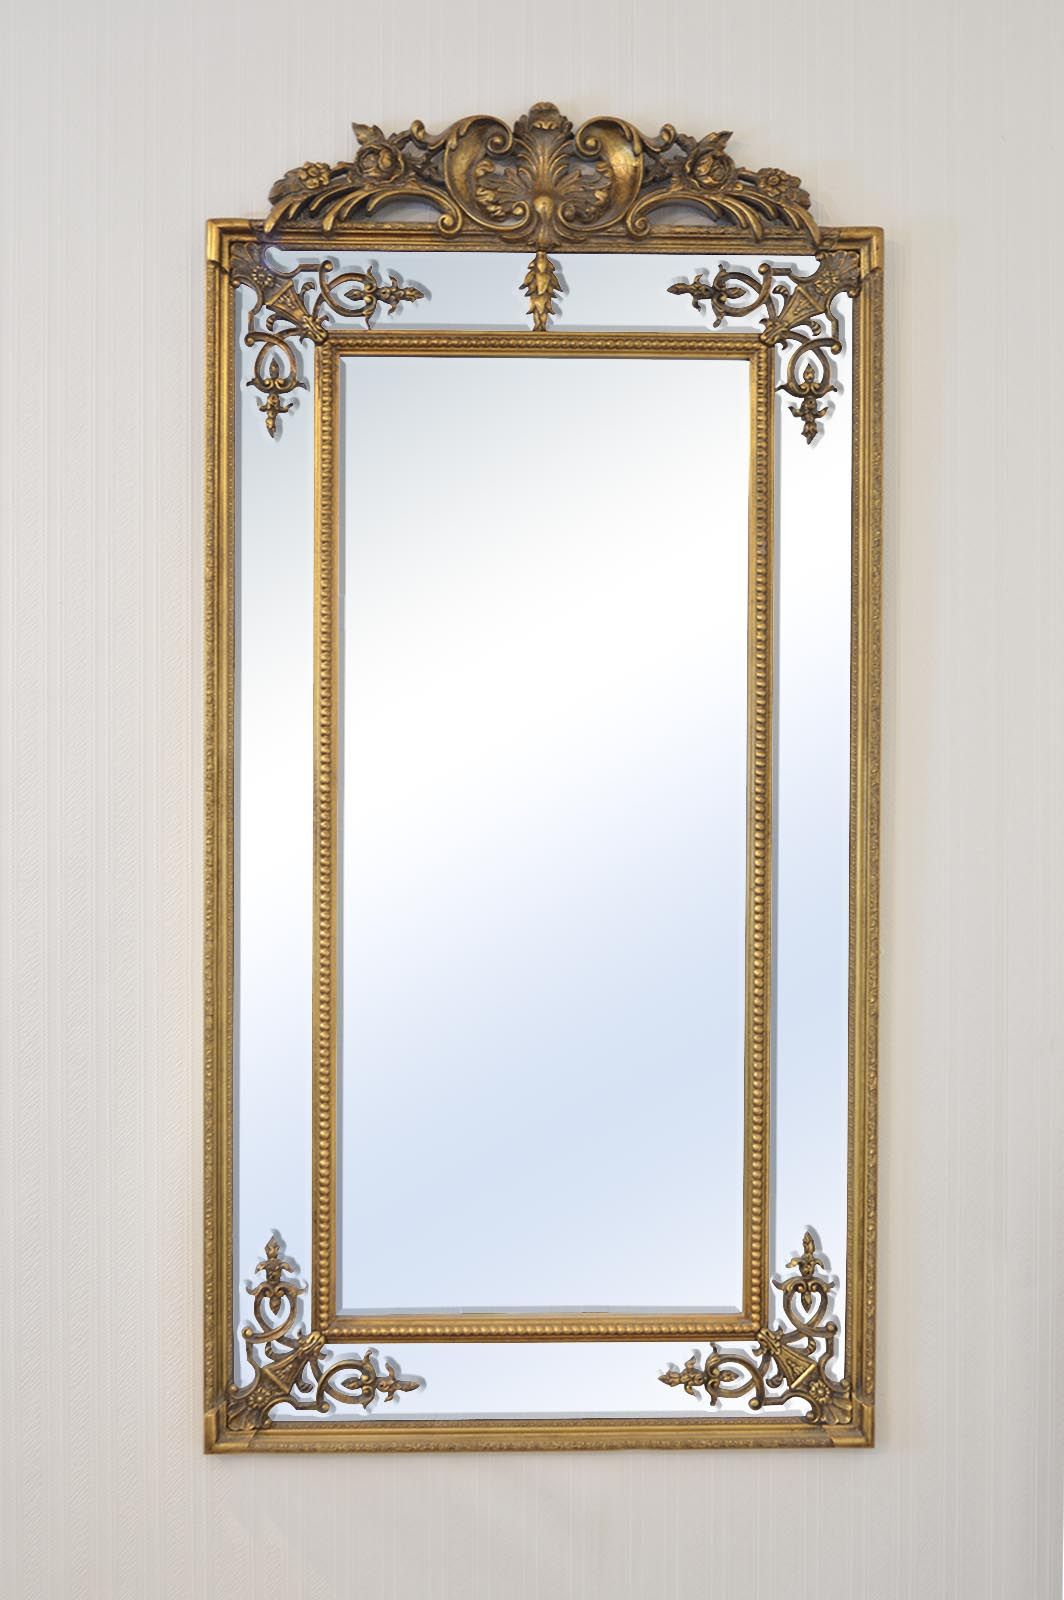 Large Gold Ornate Antique Design Wall Mounted Mirror New 6Ft X 3Ft Within Antique Gold Scallop Wall Mirrors (View 1 of 15)